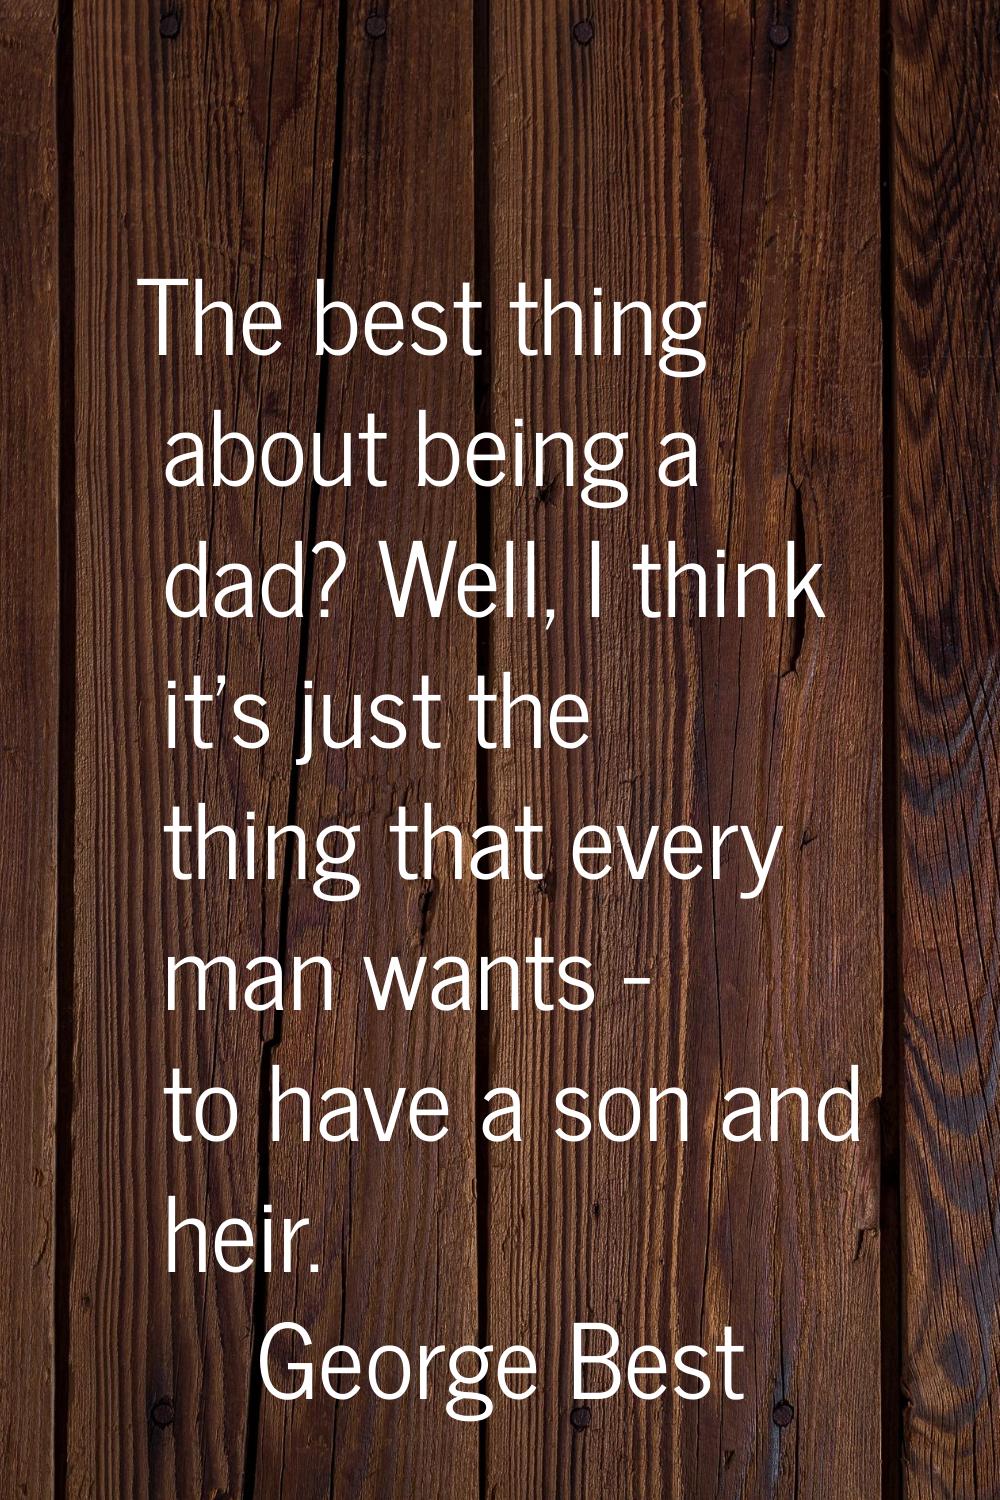 The best thing about being a dad? Well, I think it's just the thing that every man wants - to have 